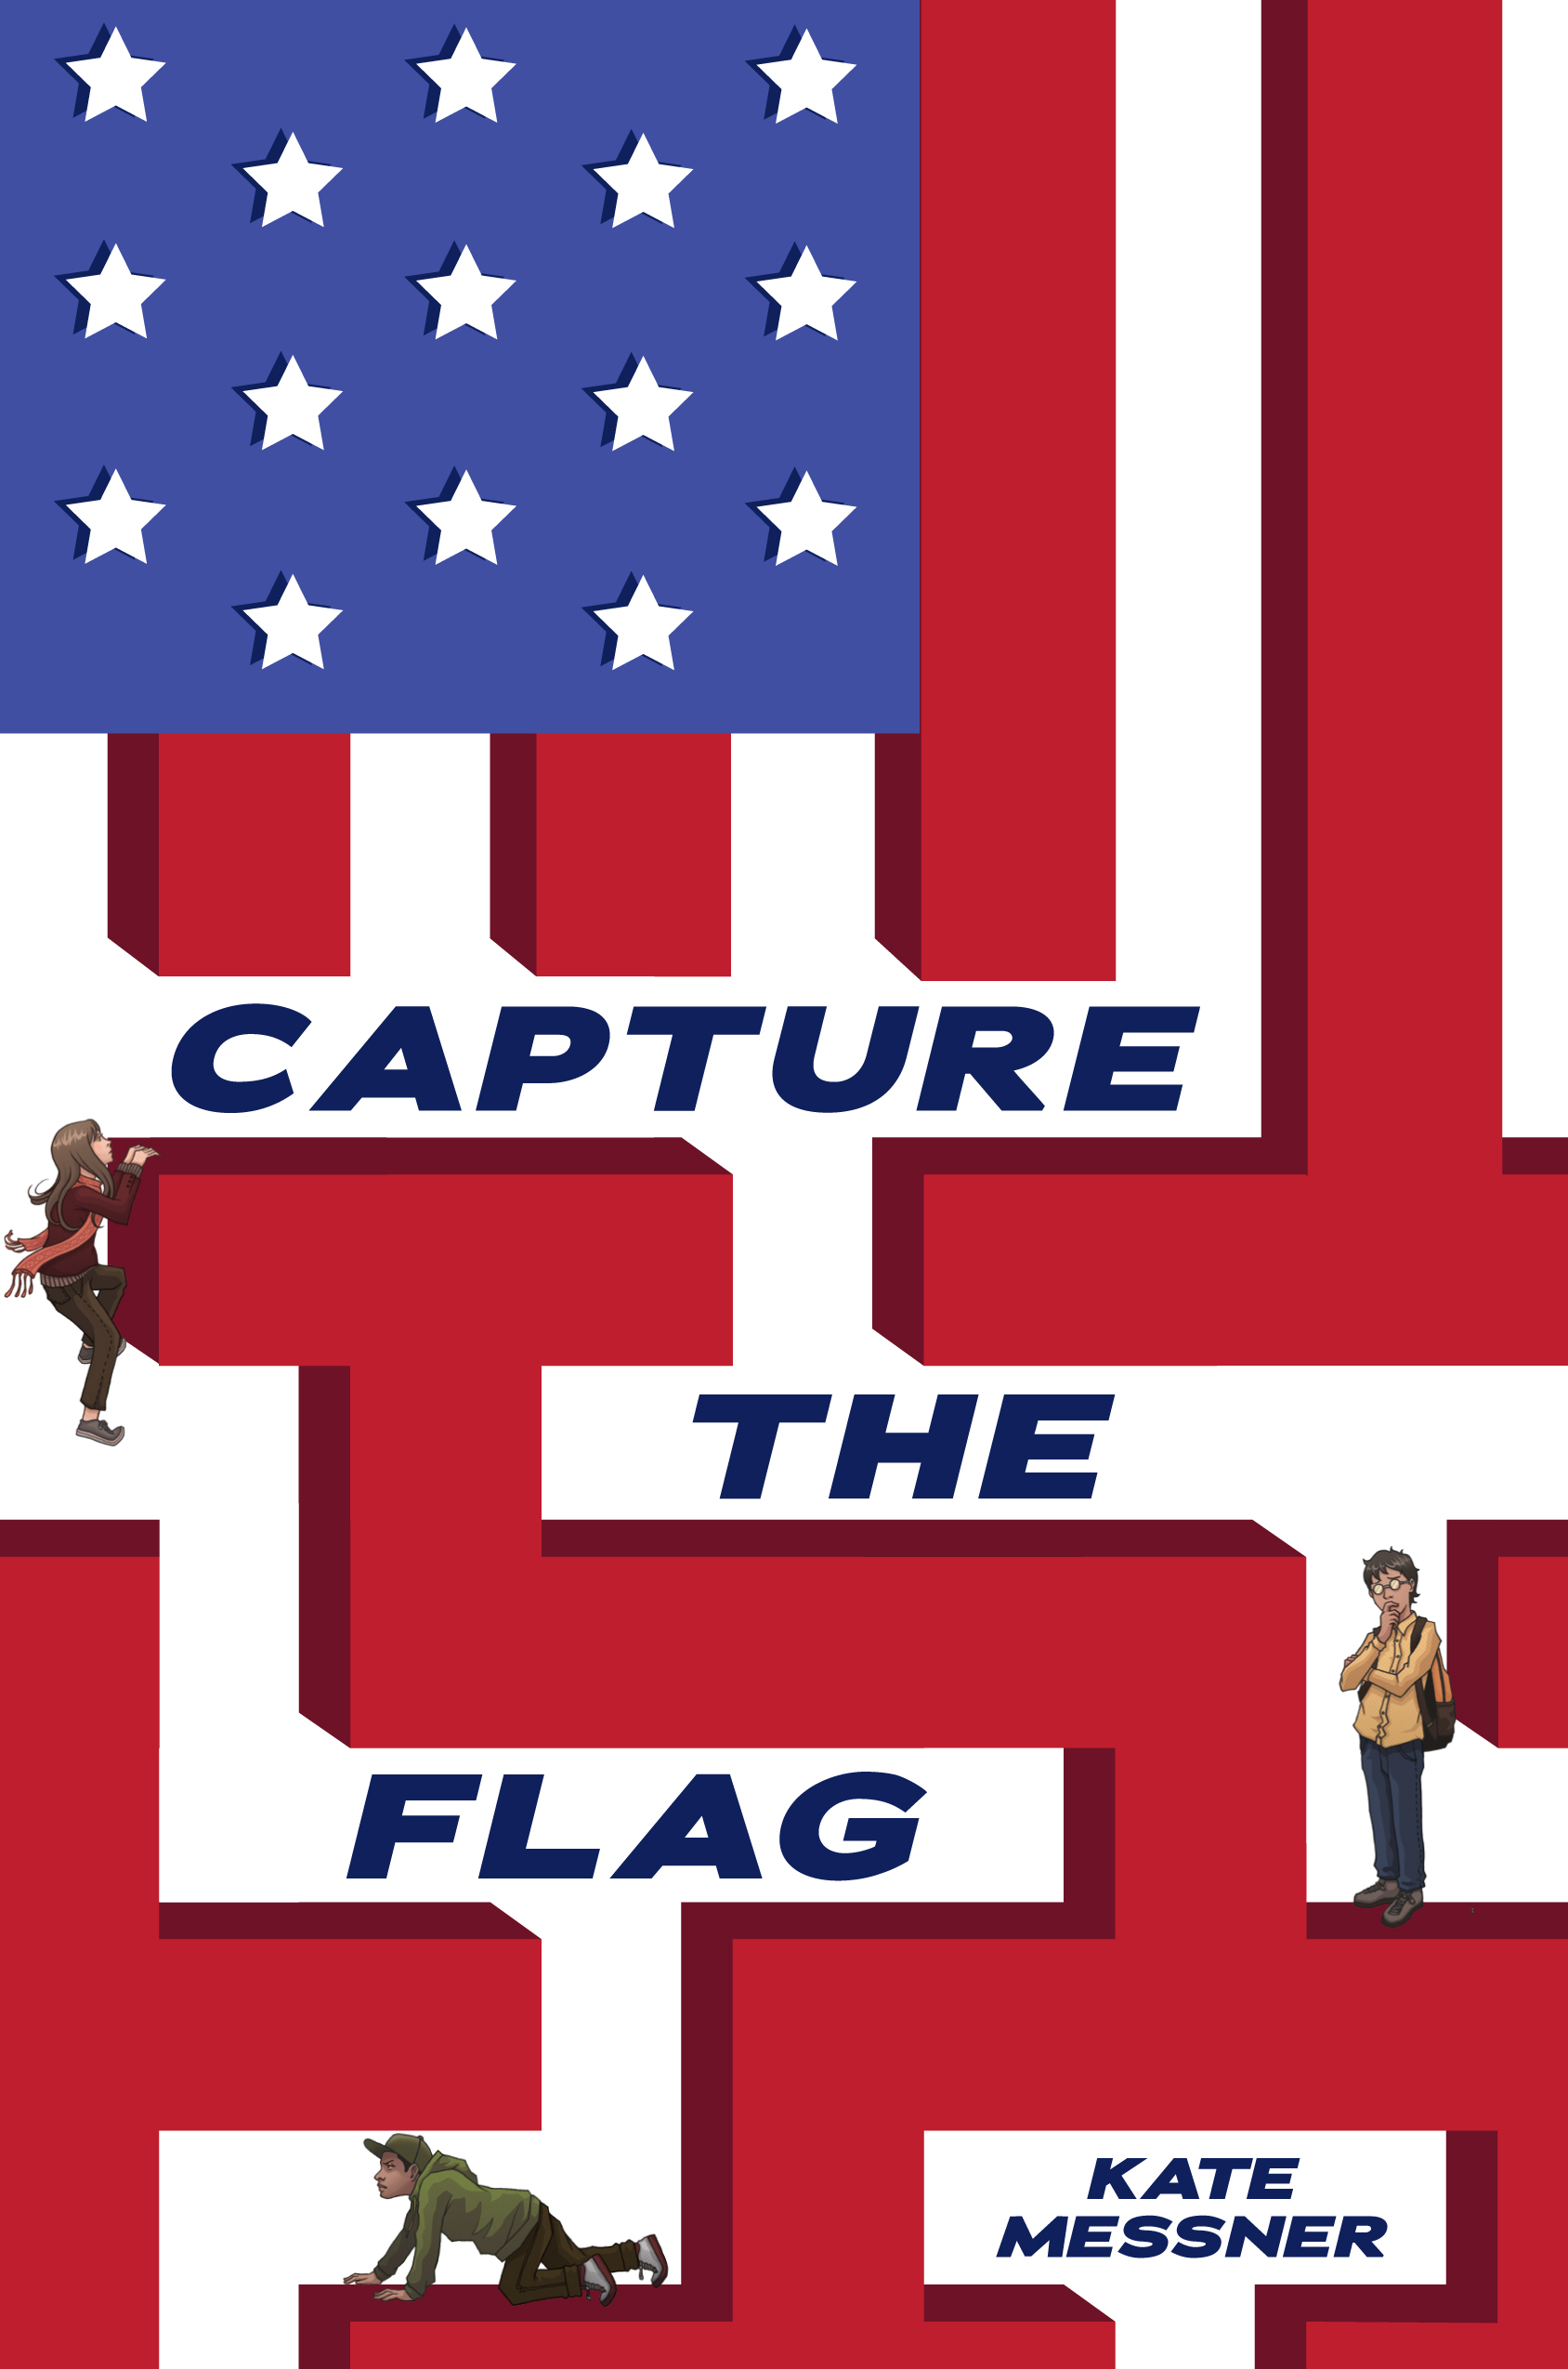 Capture The Flag Wallpapers Movie Hq Capture The Flag Pictures 4k Wallpapers 2019 - capture the flag team beta roblox